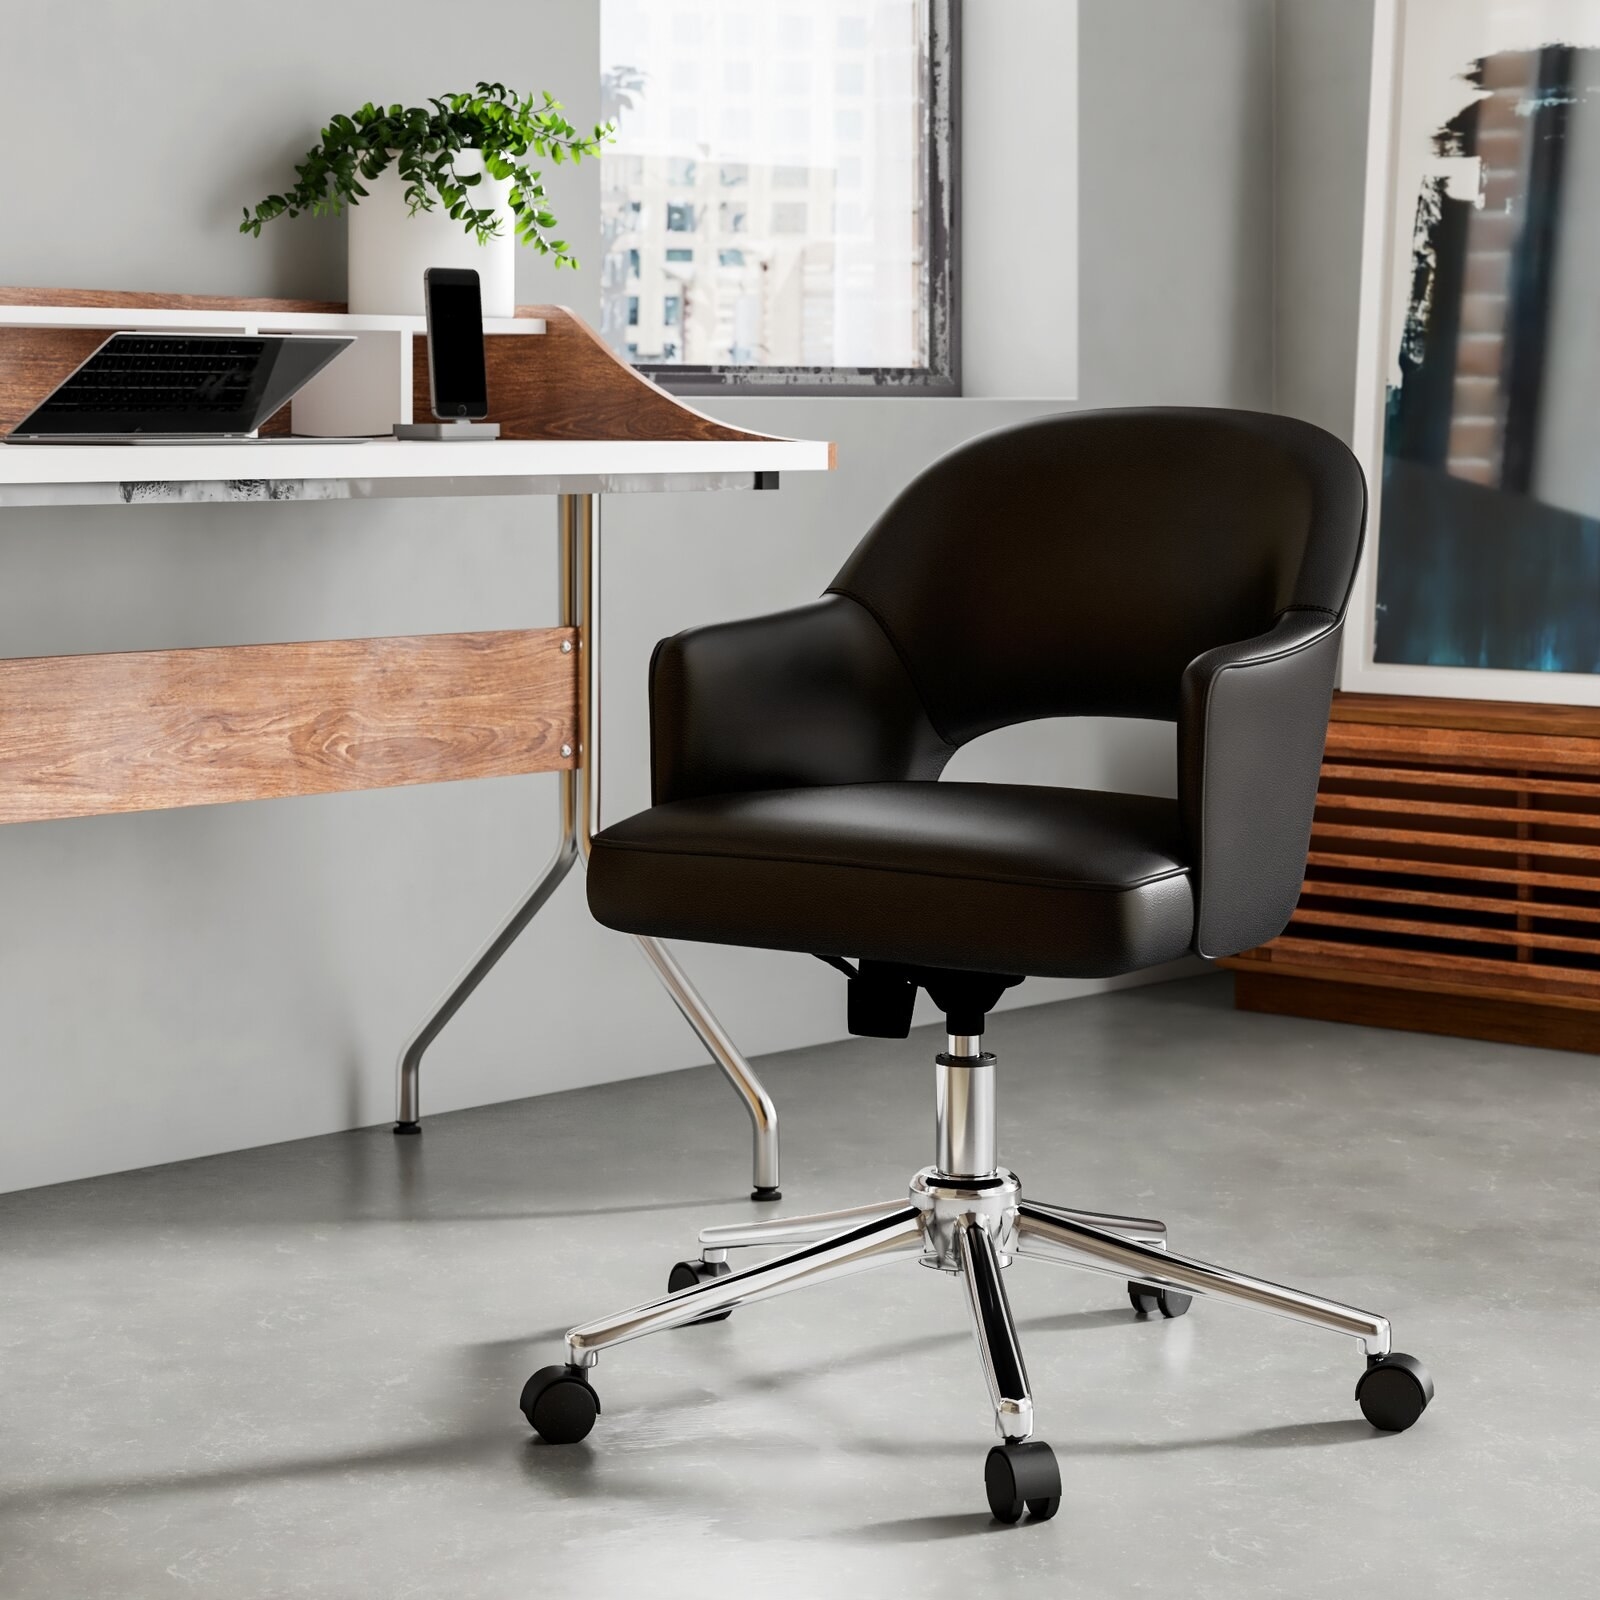 black leather office chair with wheels